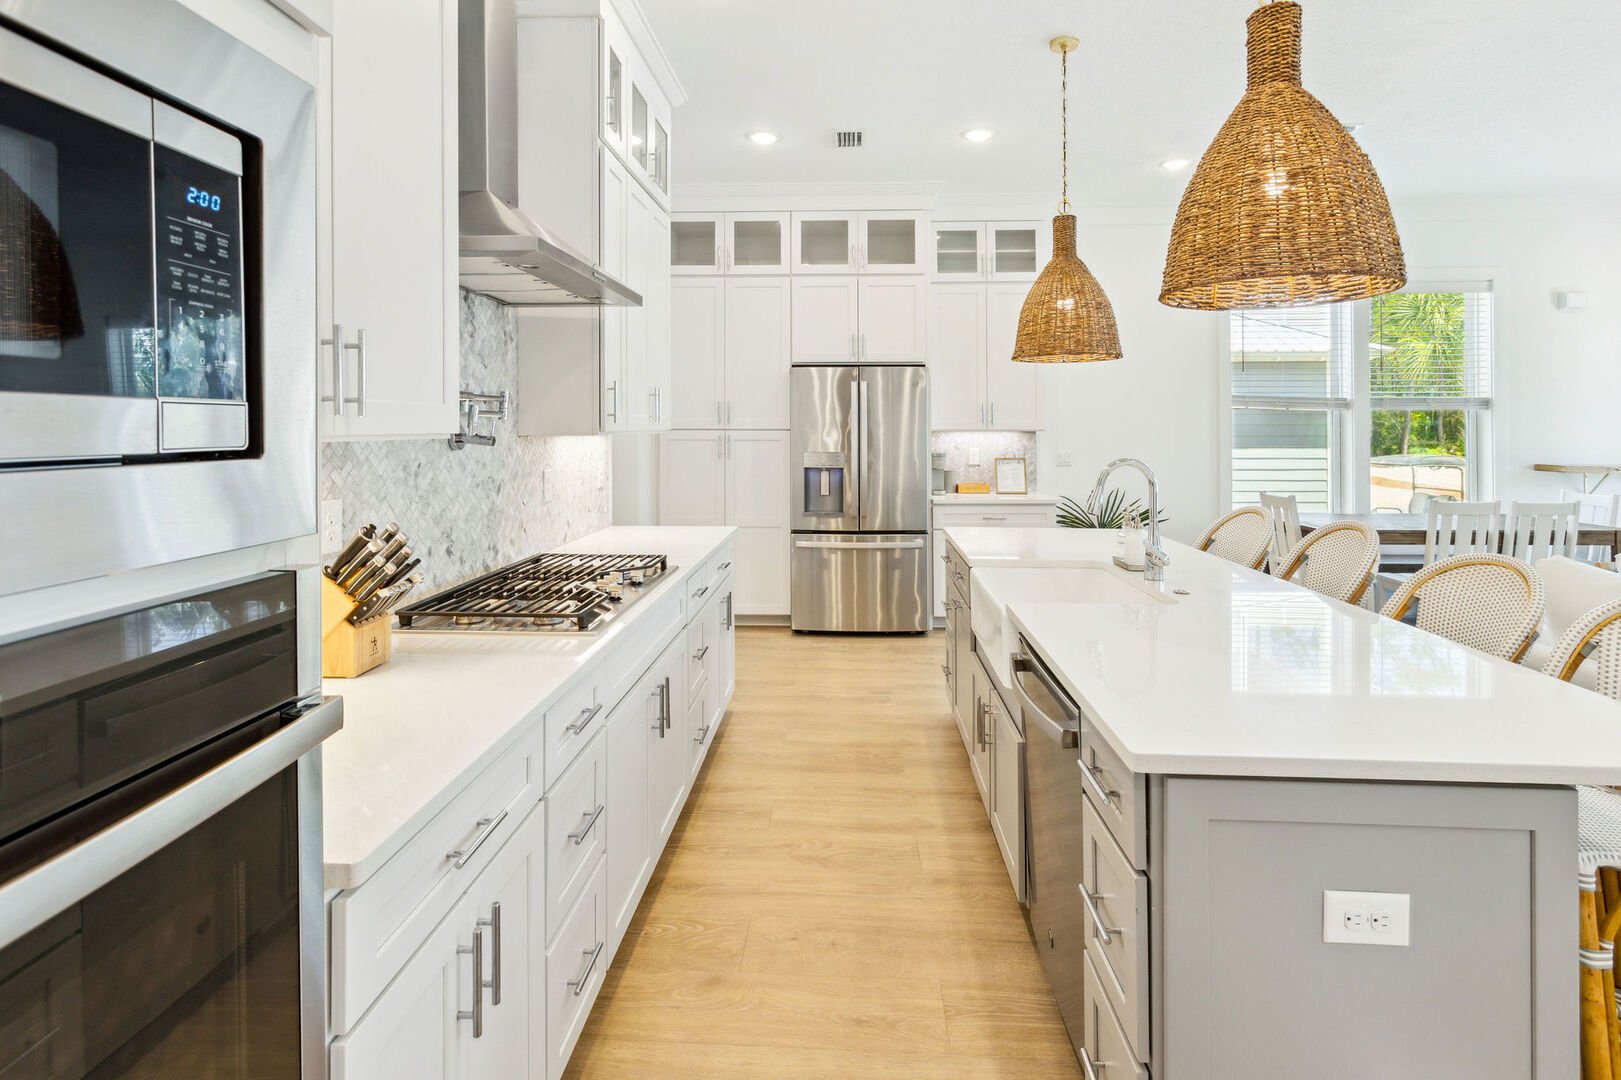 Gourmet kitchen is perfect for cooking meals or bringing in a private chef!